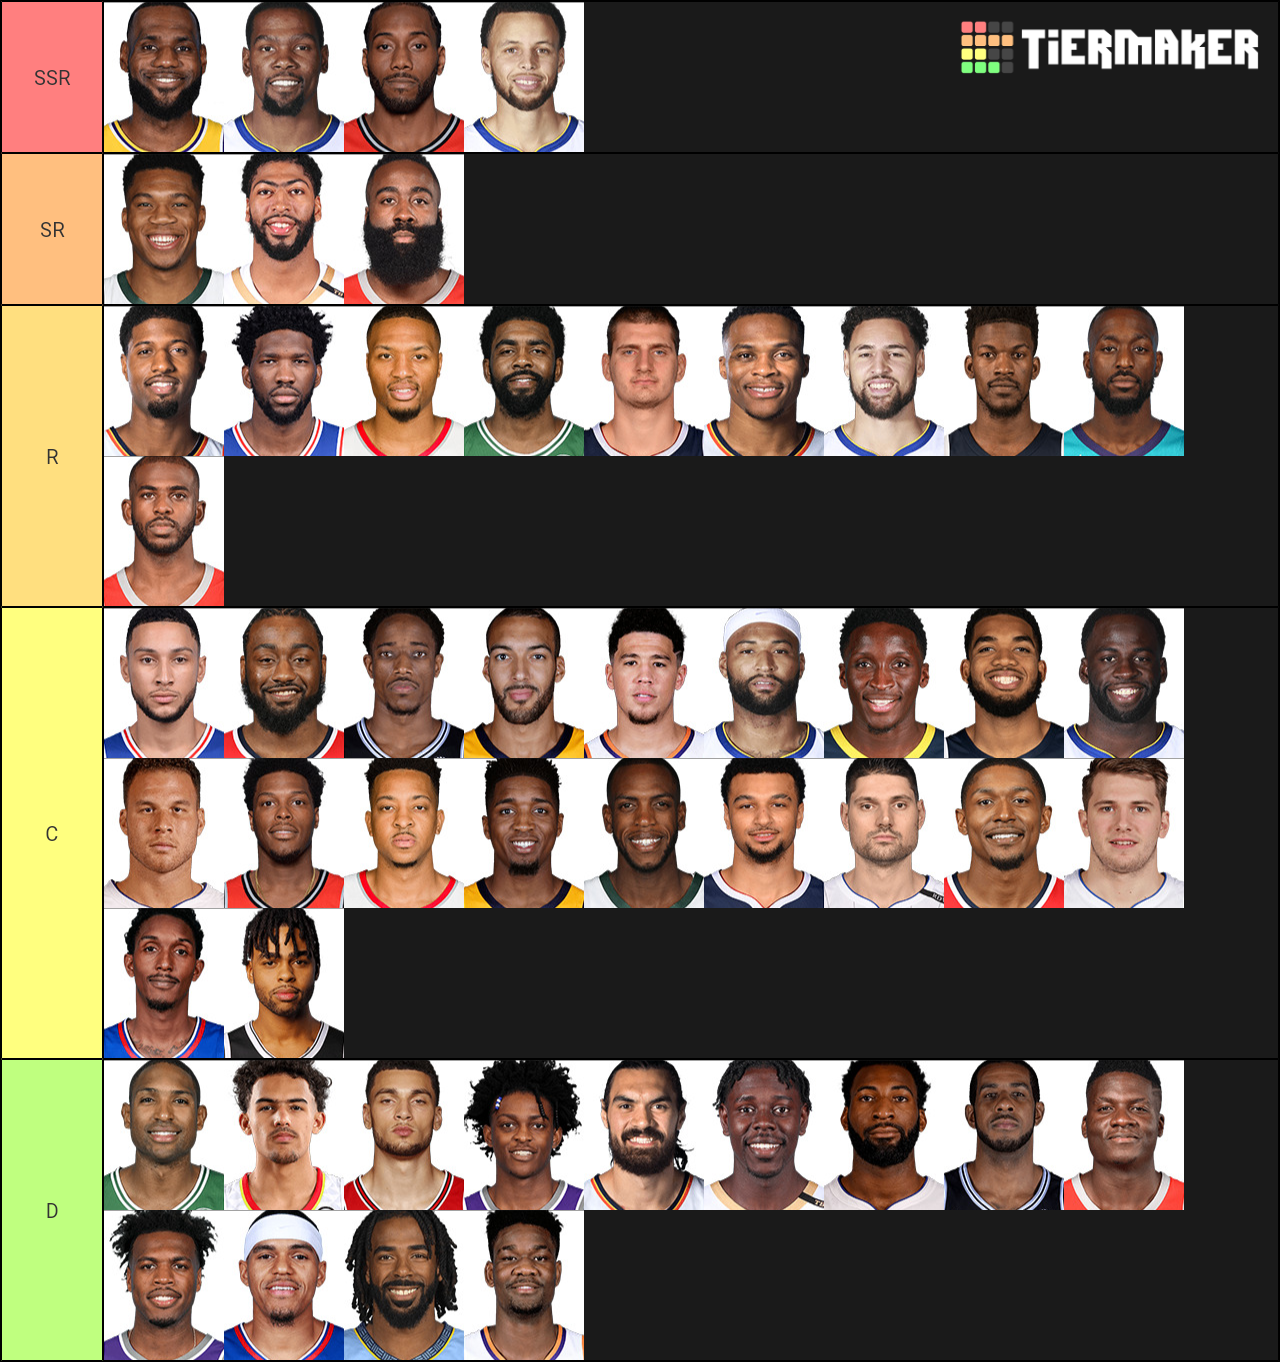 Top All Time Nba Players Tier List Community Rankings Tiermaker Sexiezpicz Web Porn